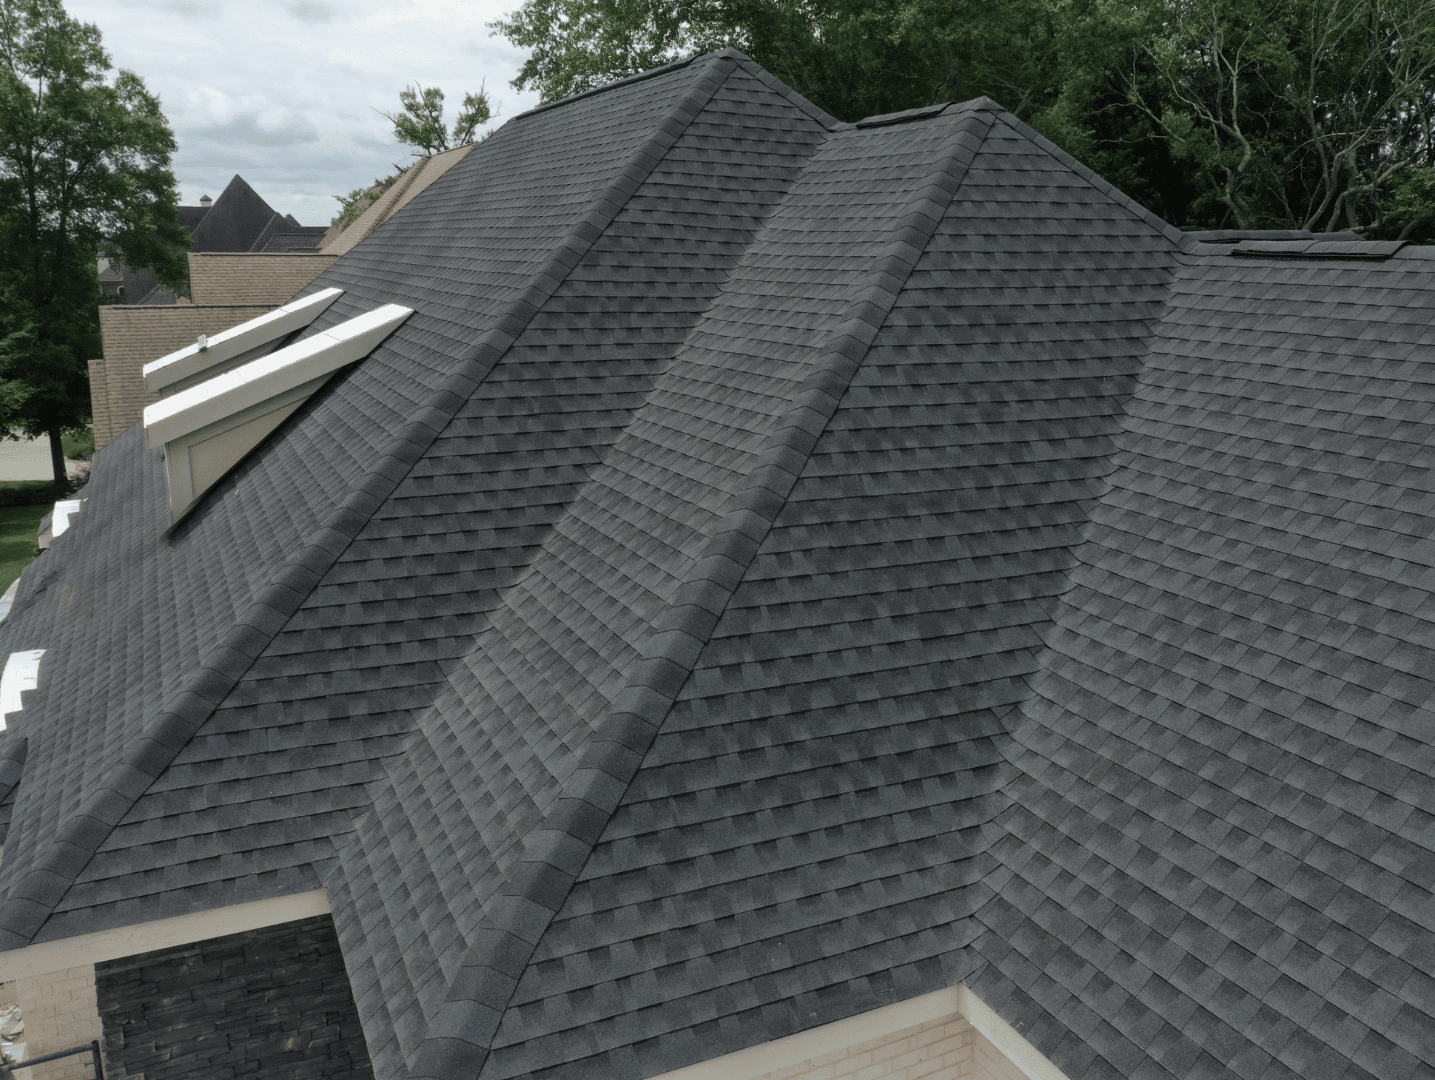 St James City Shingle Roof ORB Roofing Solutions